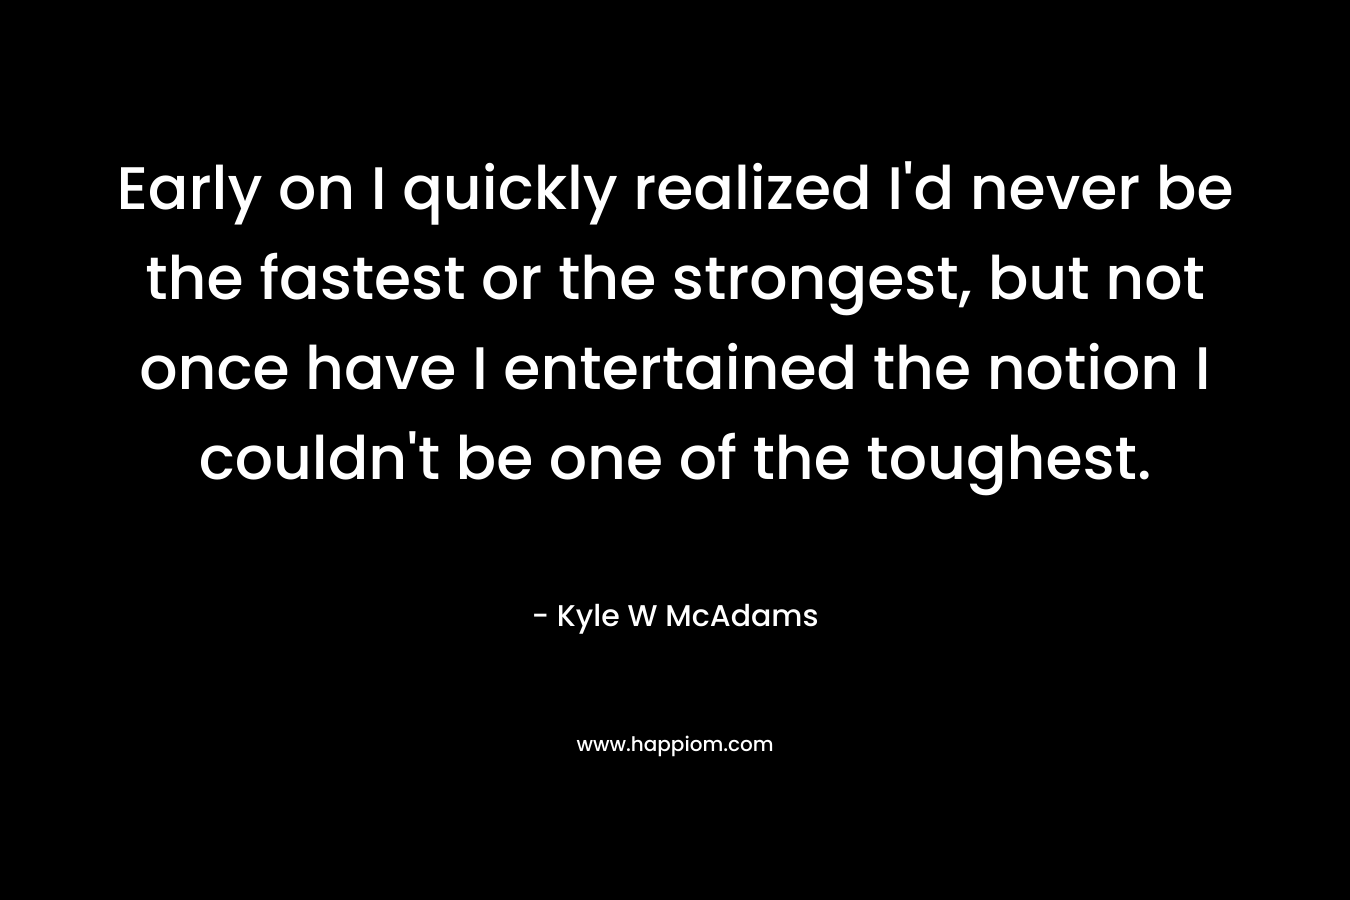 Early on I quickly realized I’d never be the fastest or the strongest, but not once have I entertained the notion I couldn’t be one of the toughest. – Kyle W McAdams